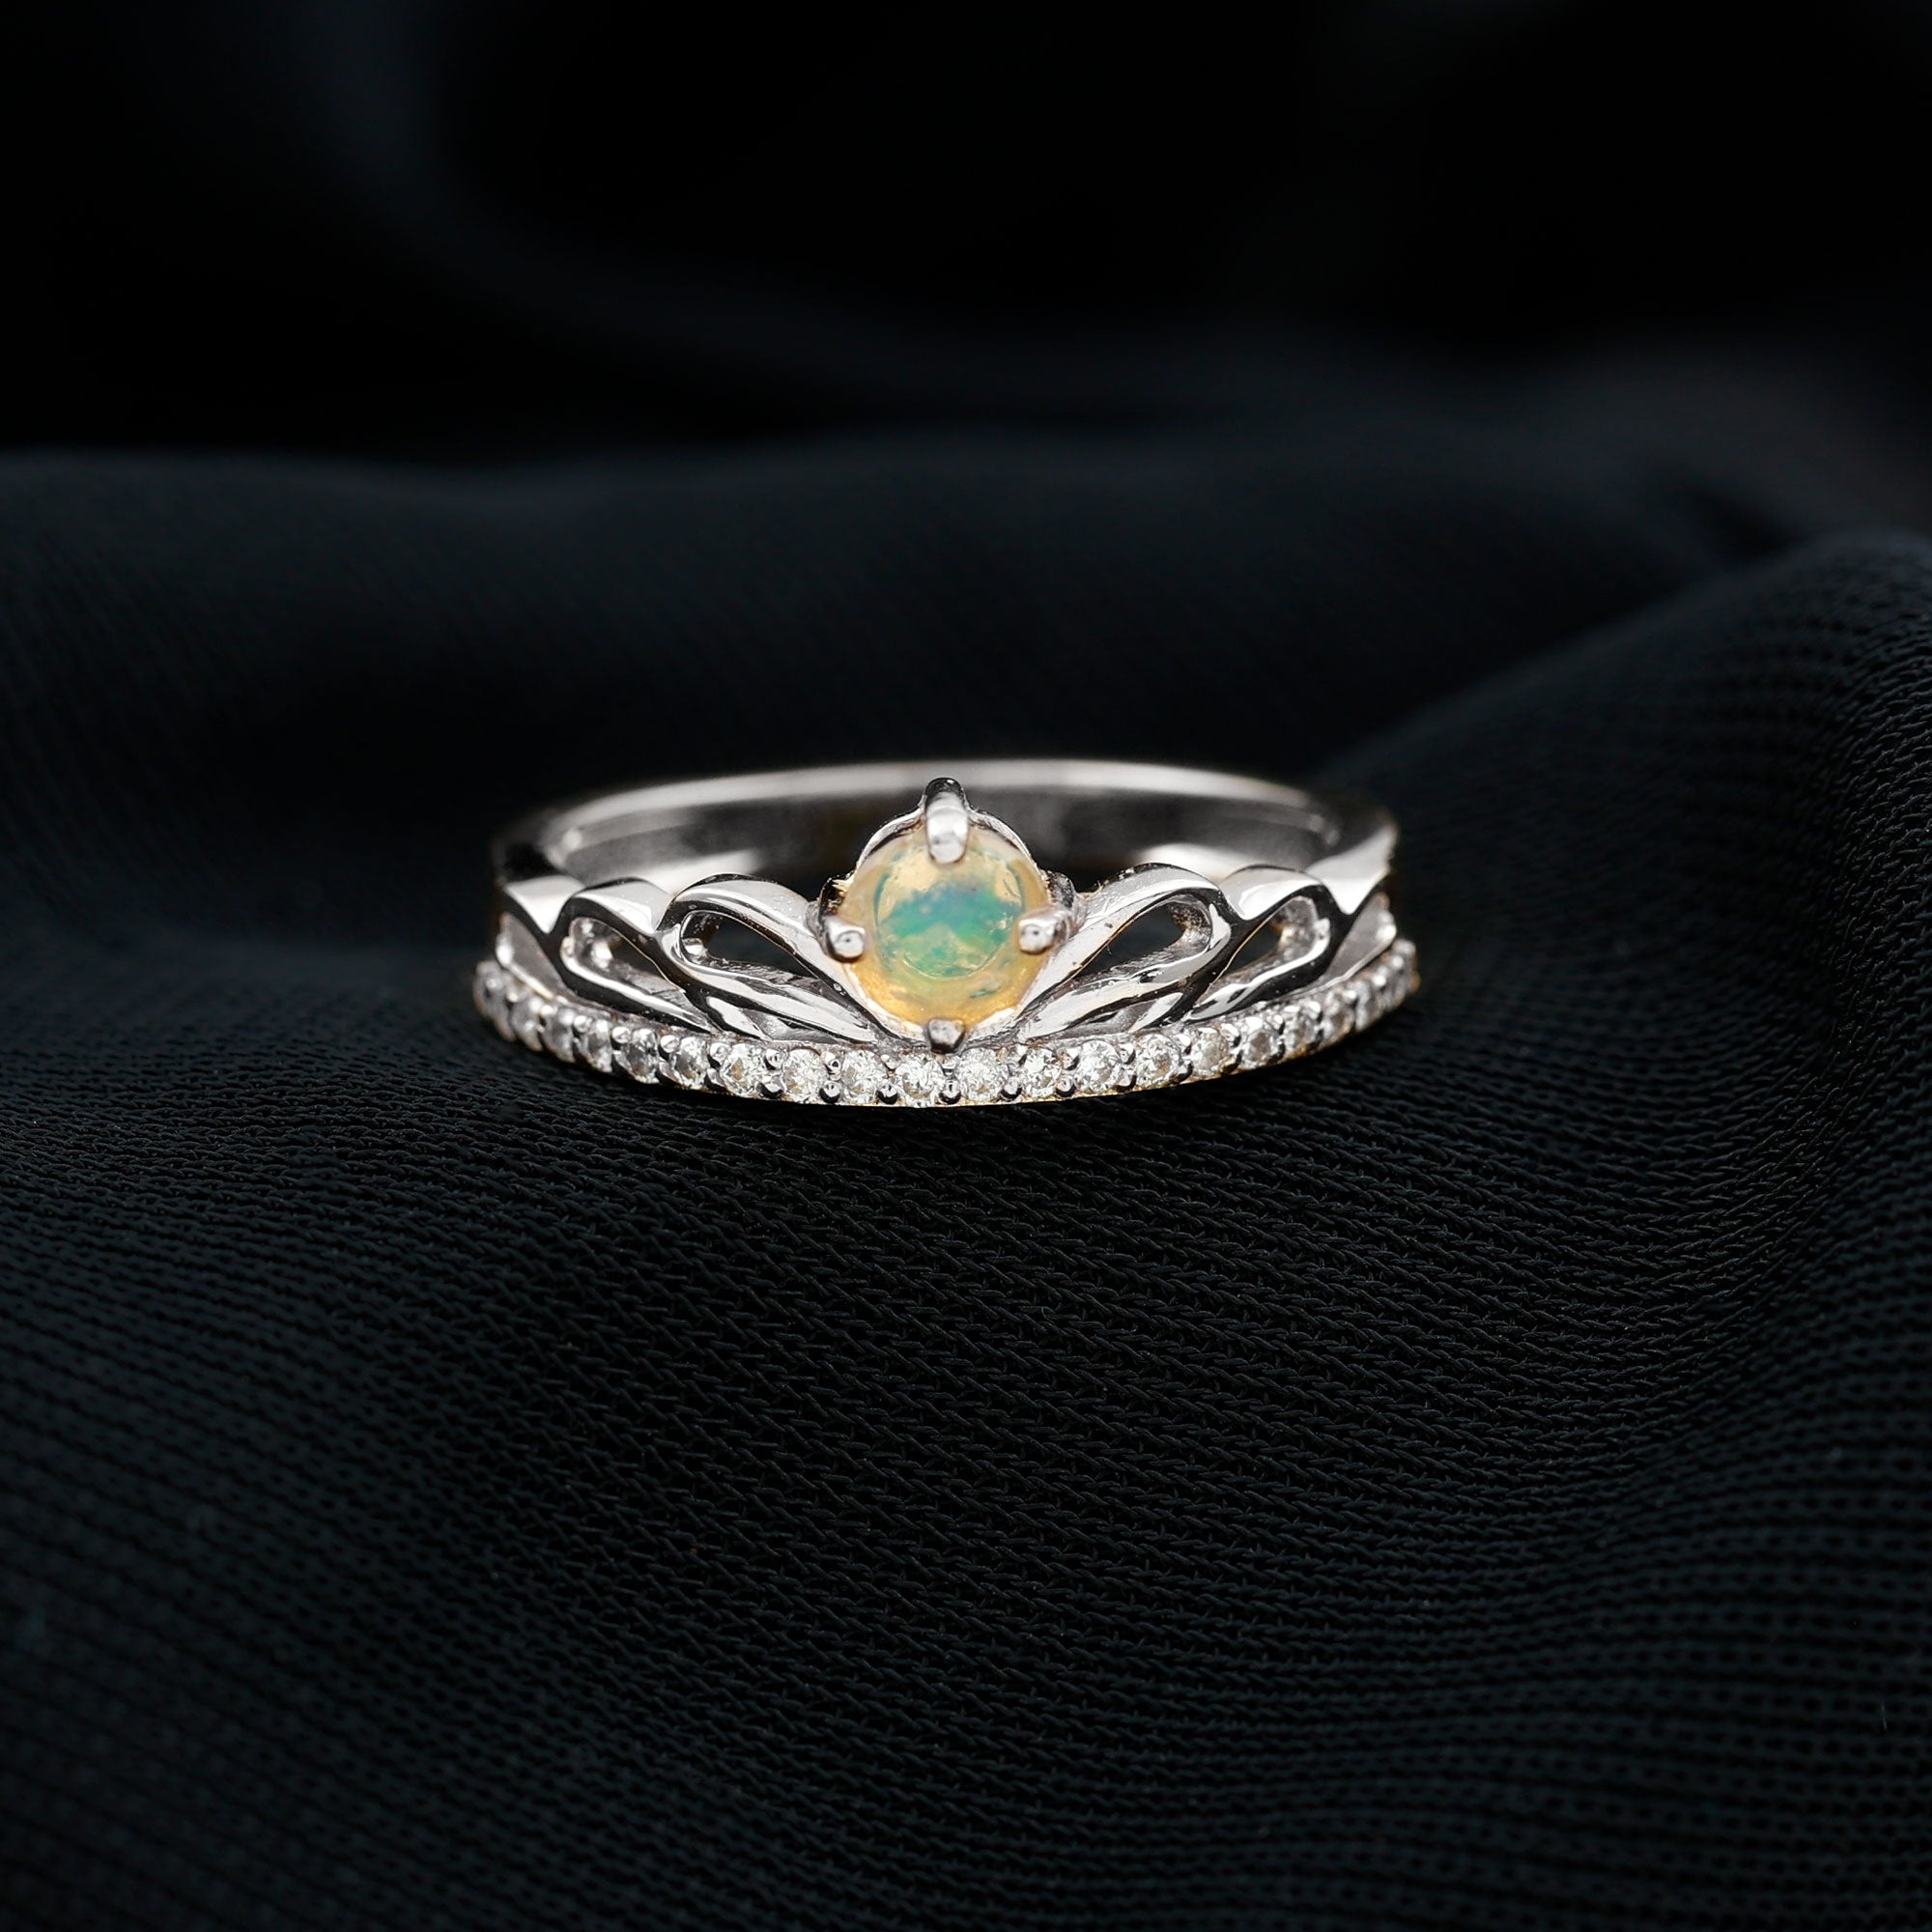 Real Ethiopian Opal and Diamond Crown Band Ring Ethiopian Opal - ( AAA ) - Quality - Rosec Jewels